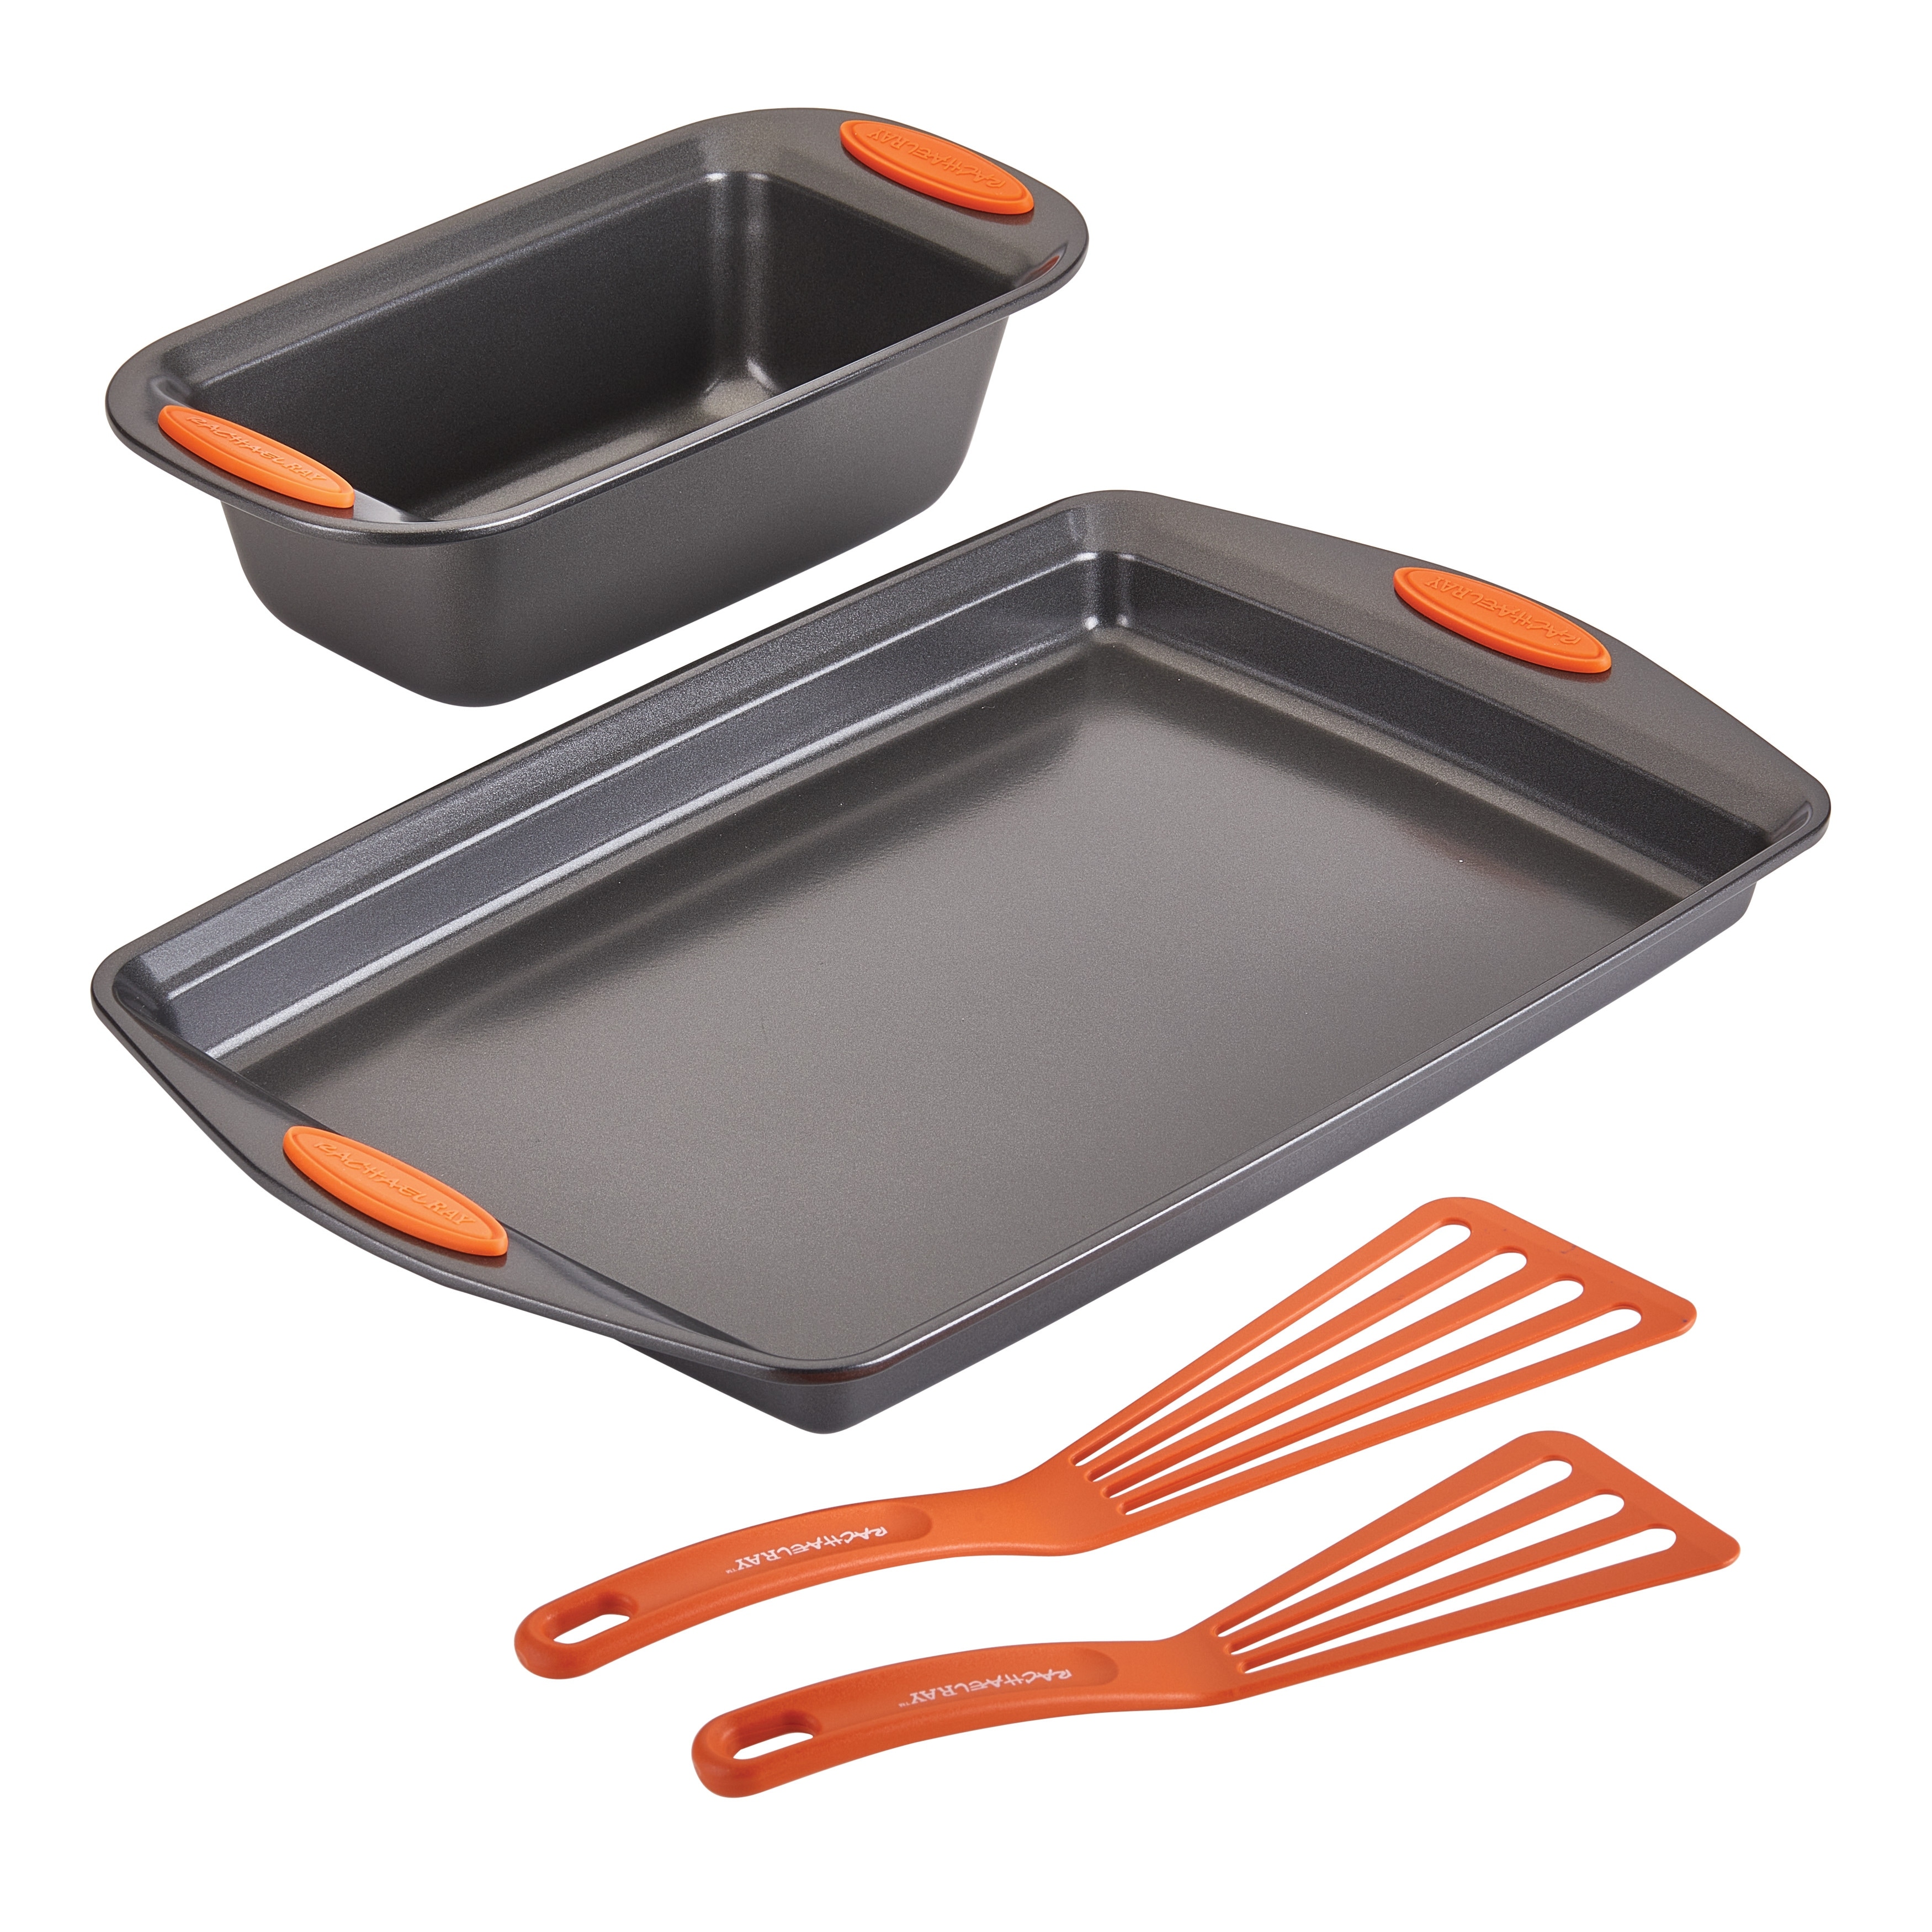 https://ak1.ostkcdn.com/images/products/is/images/direct/ec94f768e4be5cc16e64e7453a8aaed733f47ea0/Rachael-Ray-Bakeware-Cookie-Sheet-Loaf-Pan-%26-Utensil-4PC-Set.jpg